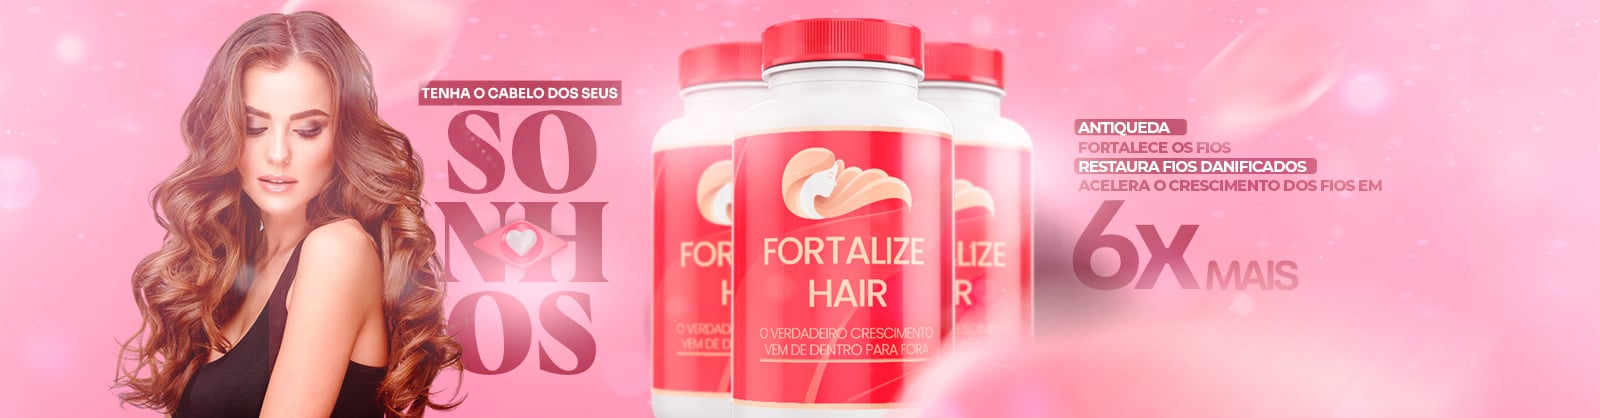 fortalizehair